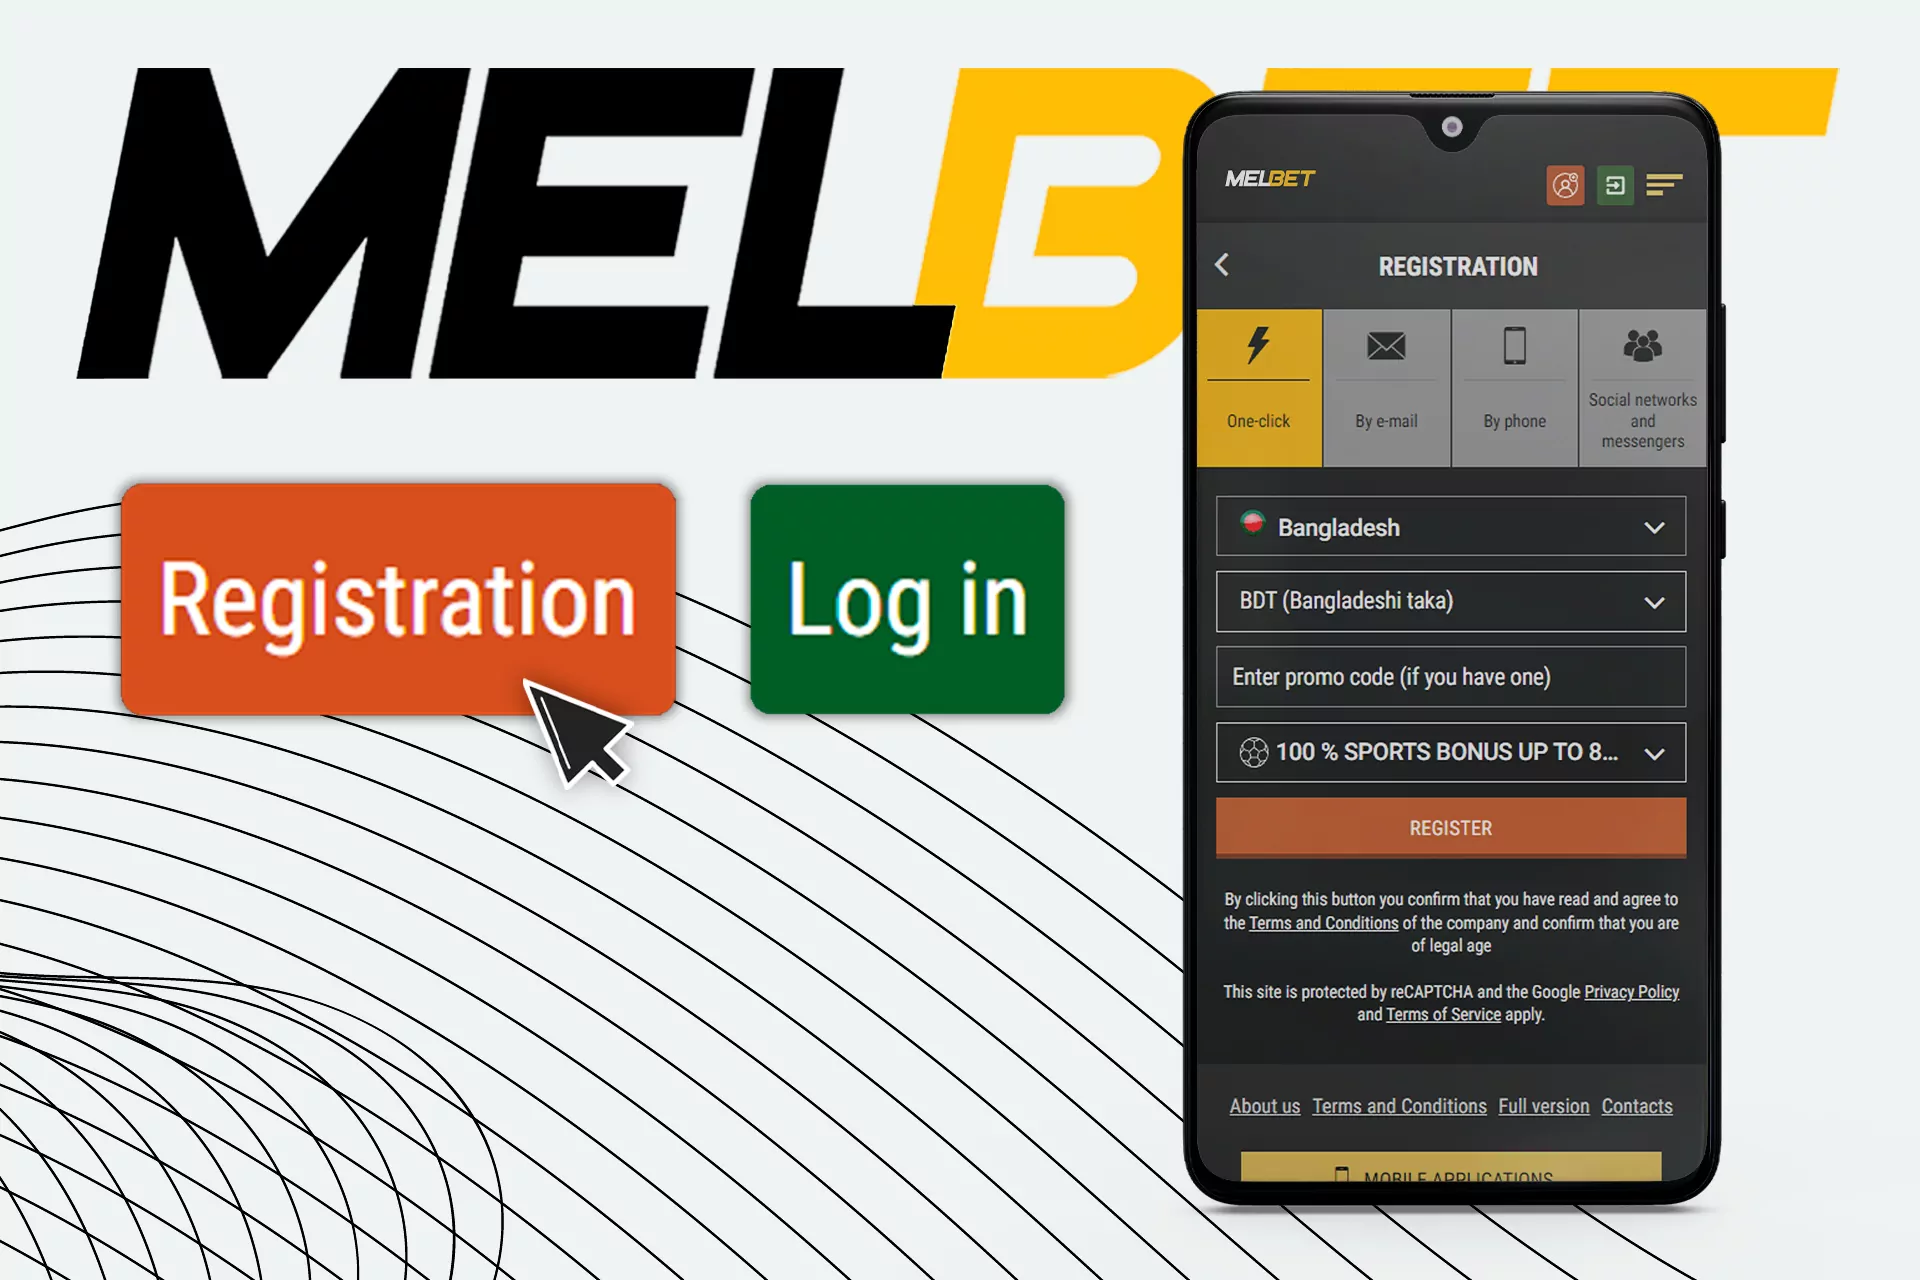 If you don't have an account at Melbet yet, first of all, you need to register in the app or on the site.